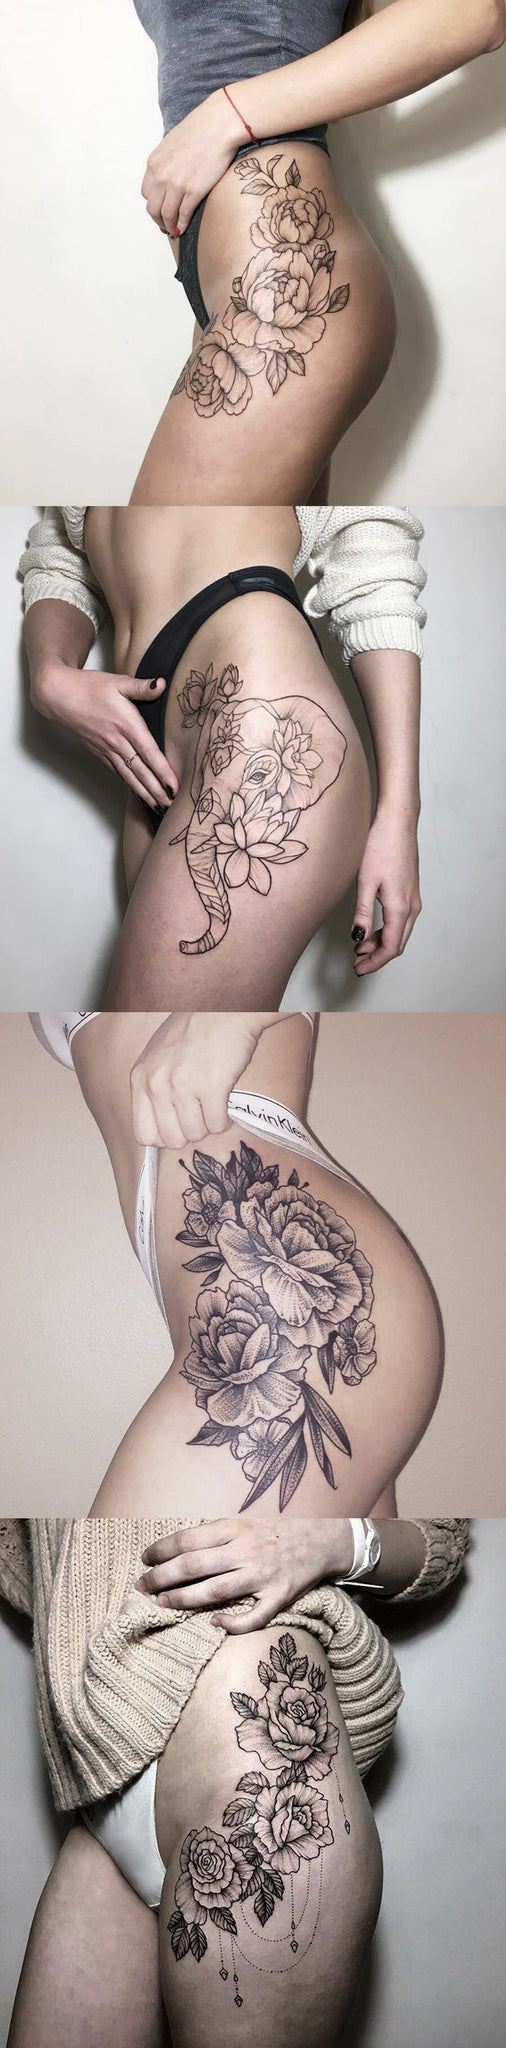 Simple Floral Flower Thigh Tattoo Ideas Black and White at MyBodiArt.com